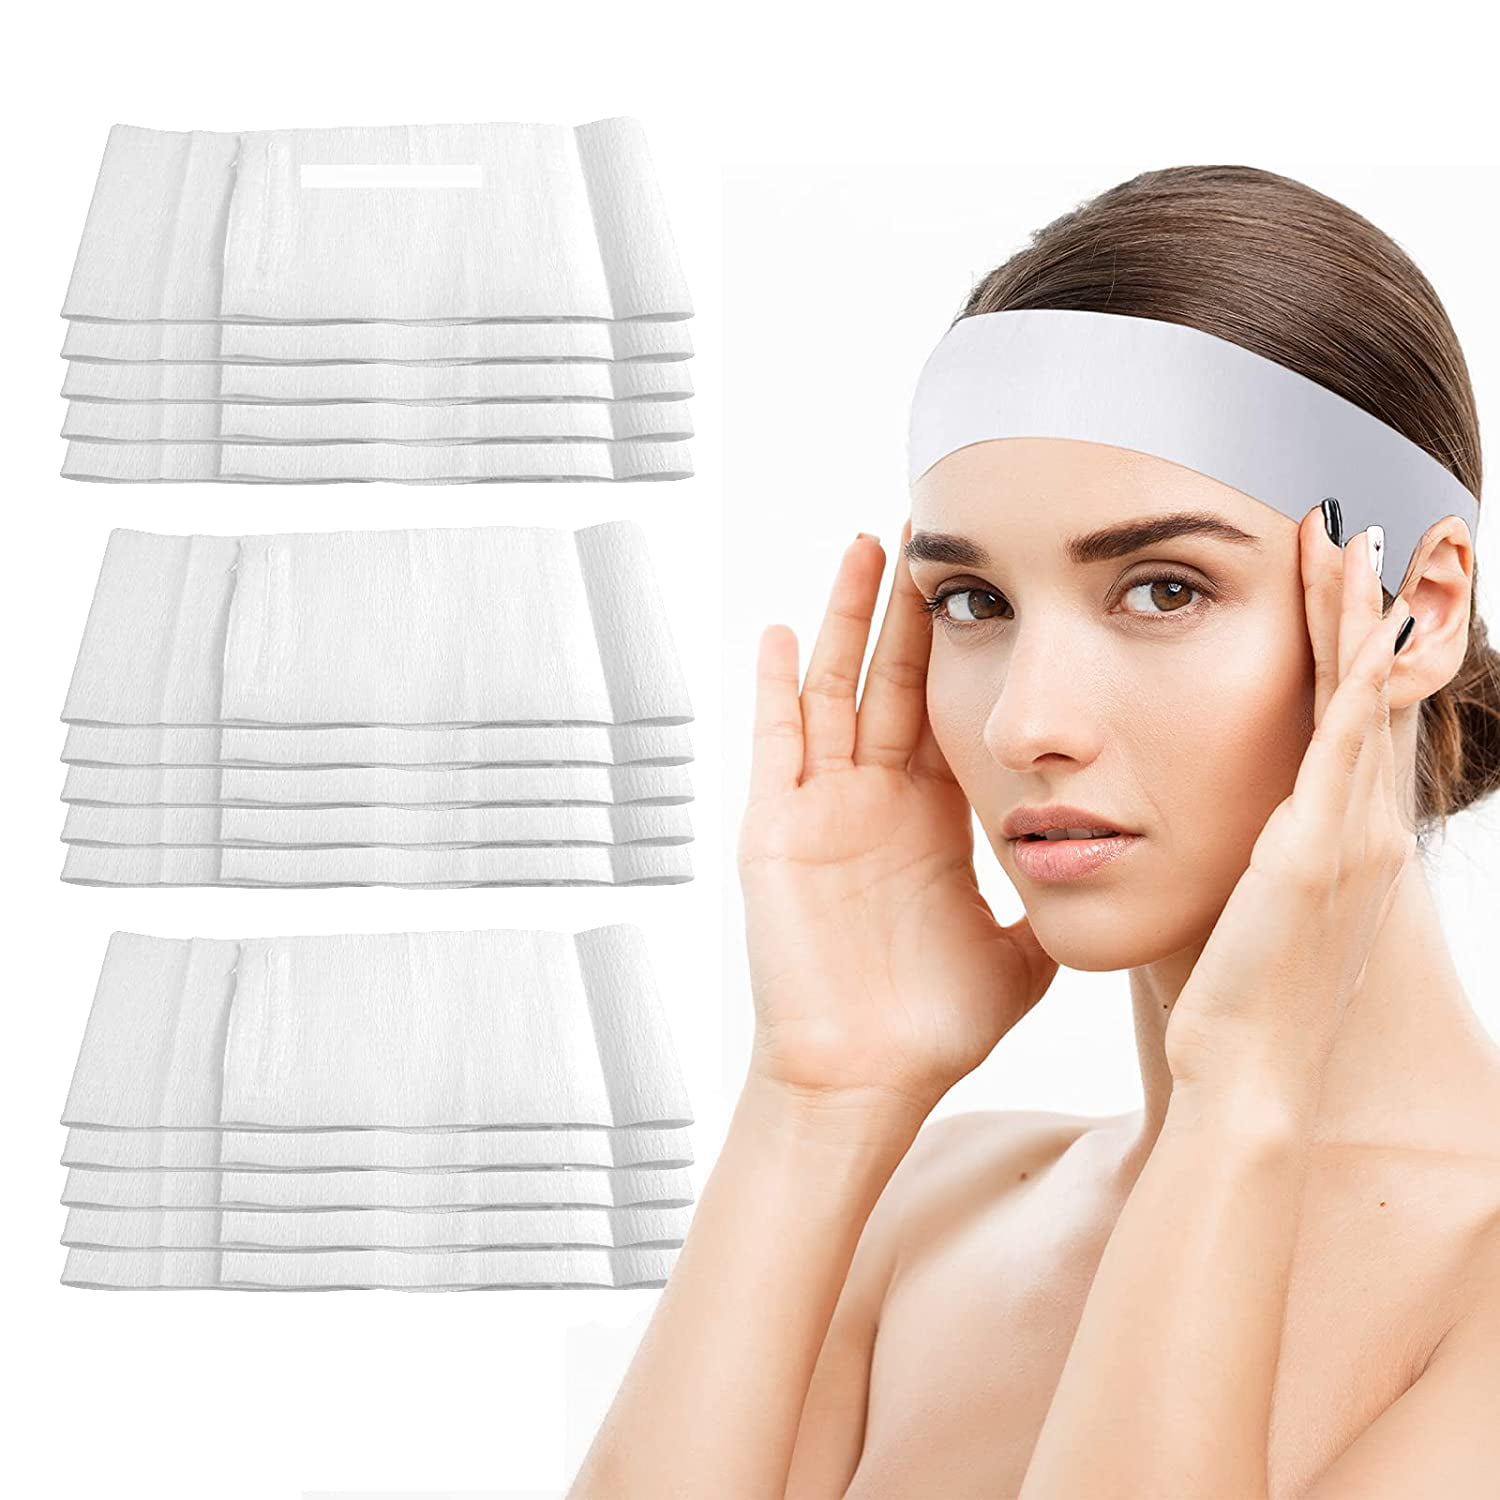 50 Disposable Stretch Headband with Hook & Loop Closure #10300 x1 